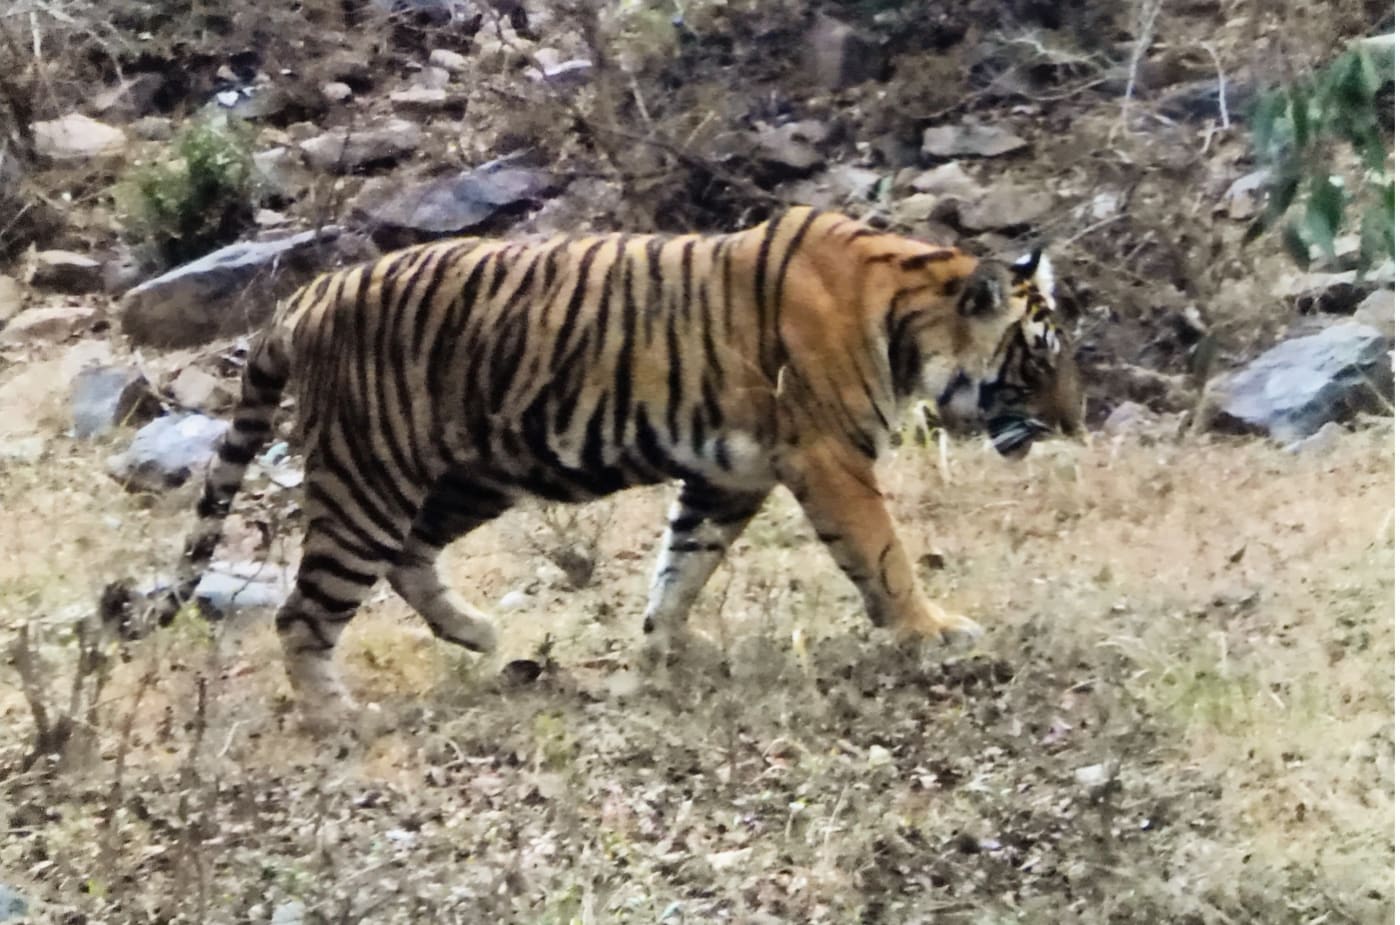 A Tiger walking in the wild